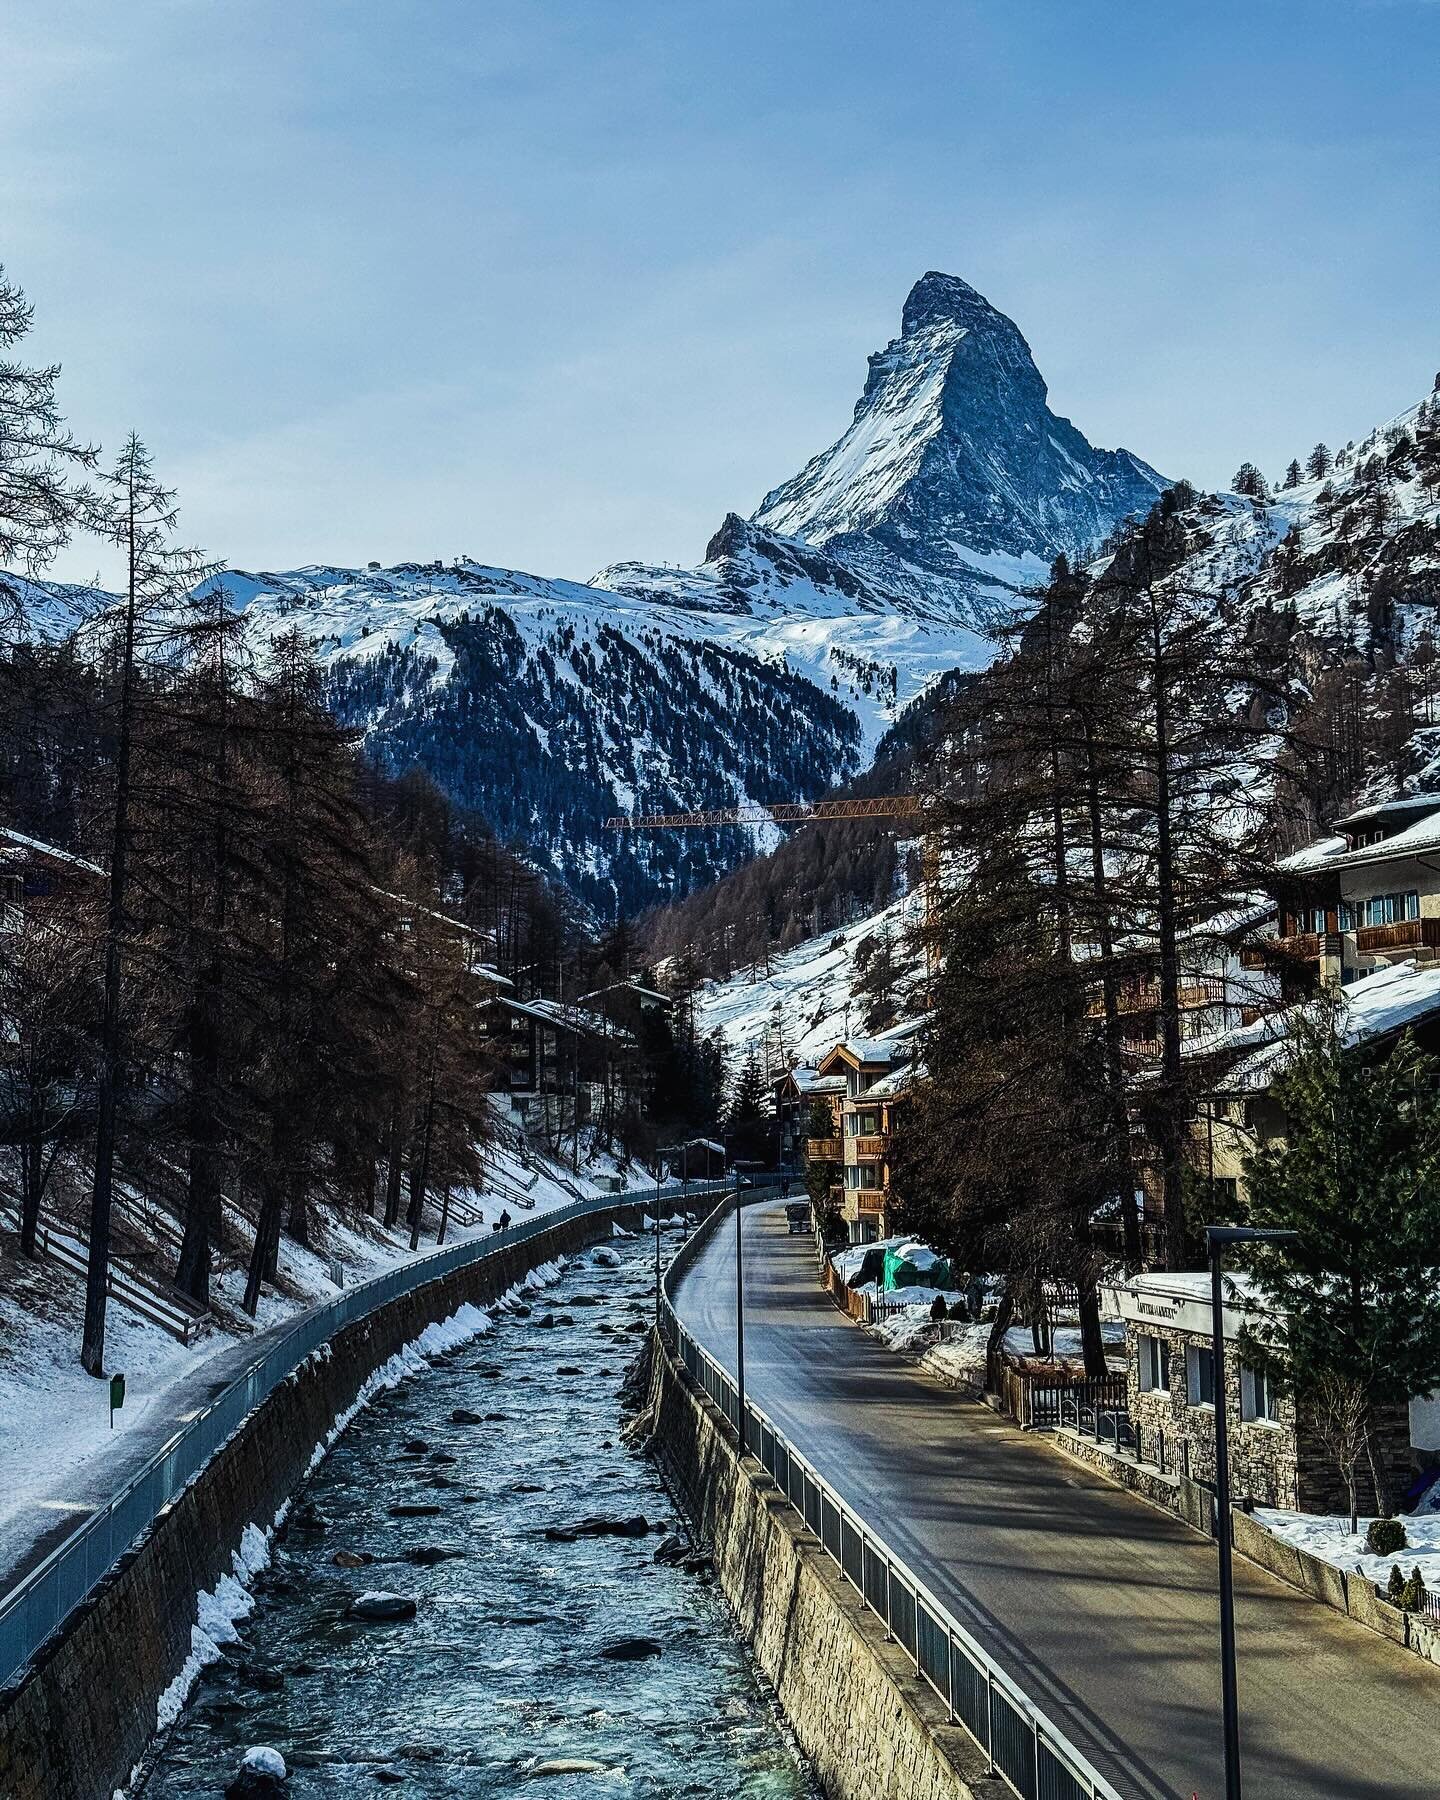 Our first glimpse of the Matterhorn&hellip; ✨ 

We&rsquo;ve just got back from a genuinely magical few days spent in the Swiss ski resort of Zermatt!!

In summer 2022, we drove our little camper van through a small section of the Swiss Alps. It was a